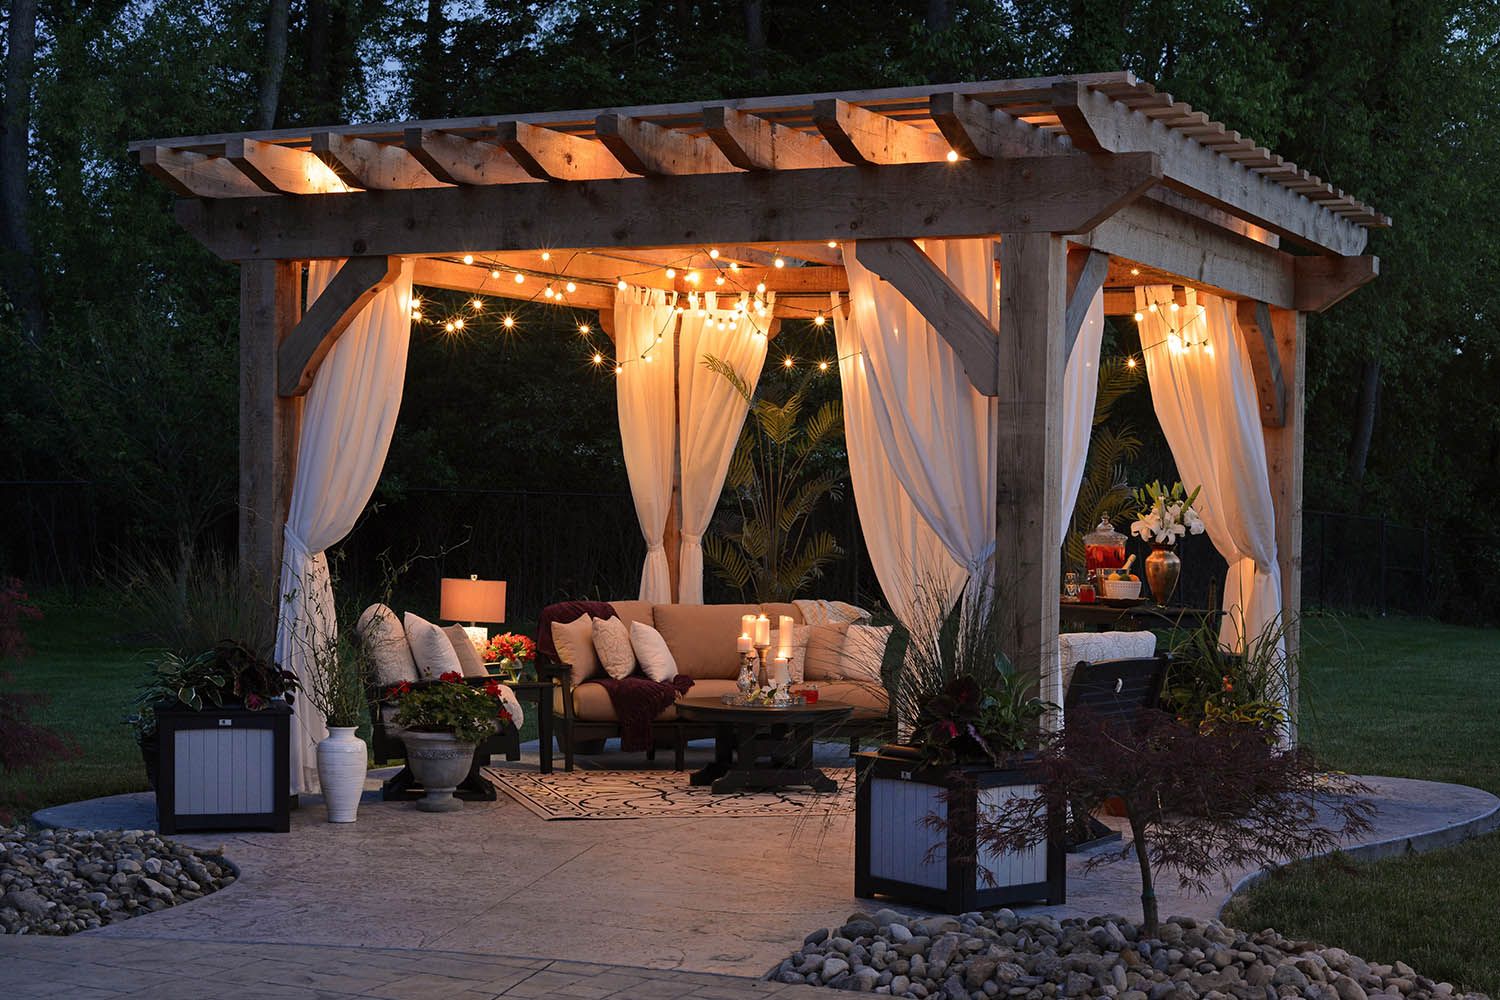 Enhance Your Outdoor Space with a Beautiful Gazebo